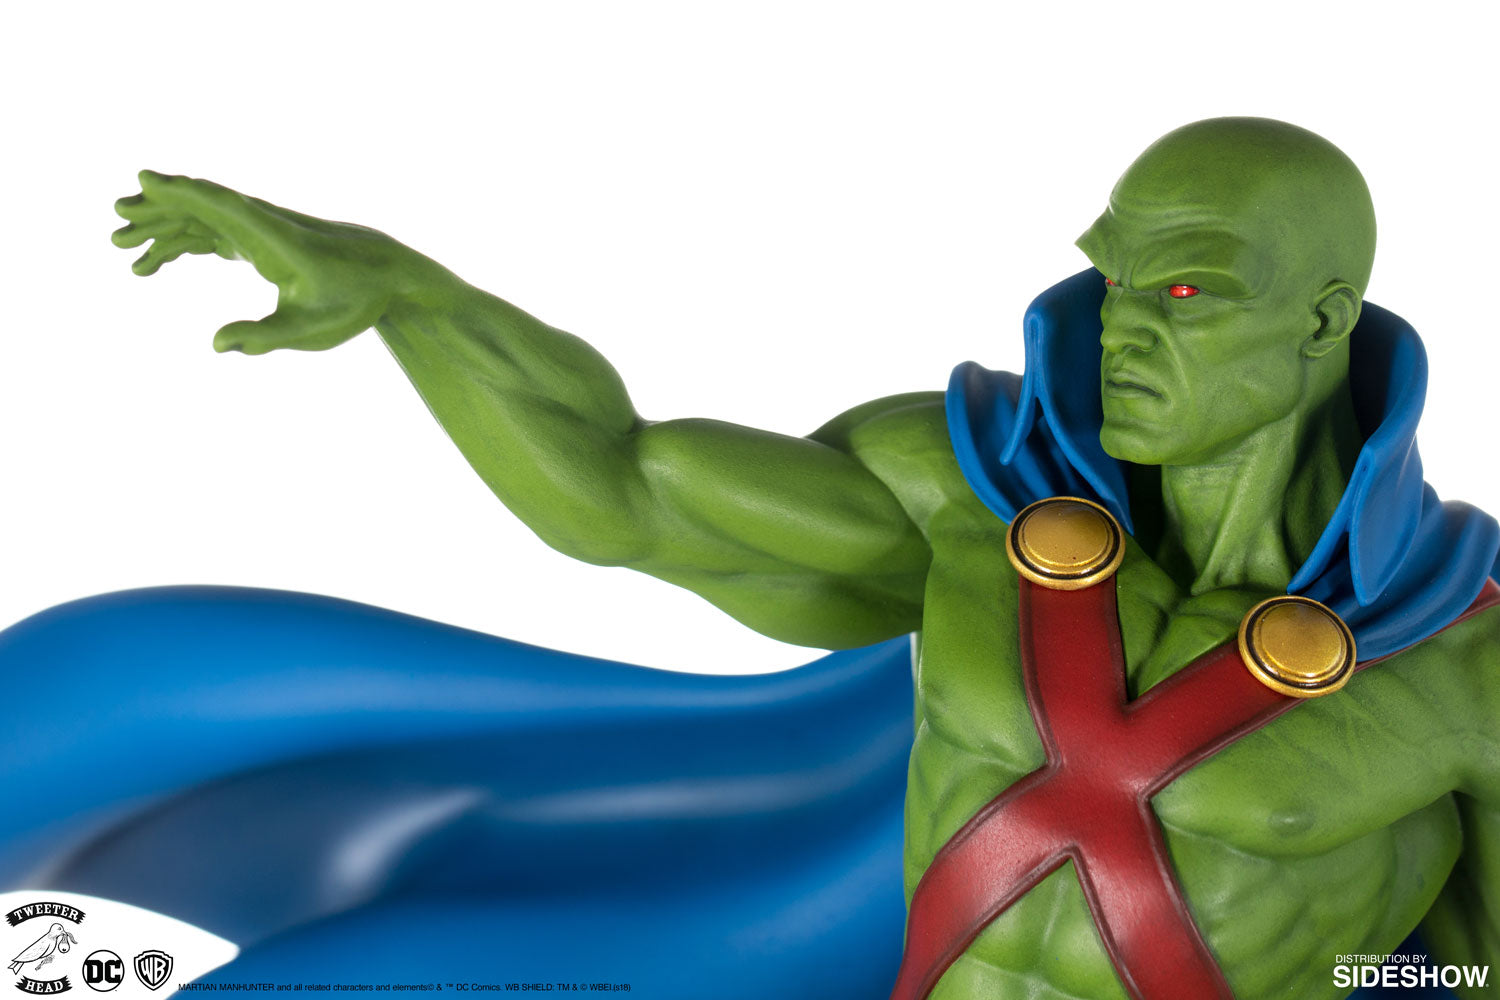 Sideshow Collectibles - Super Powers Collection - Martian Manhunter Maquette by Tweeterhead - Marvelous Toys